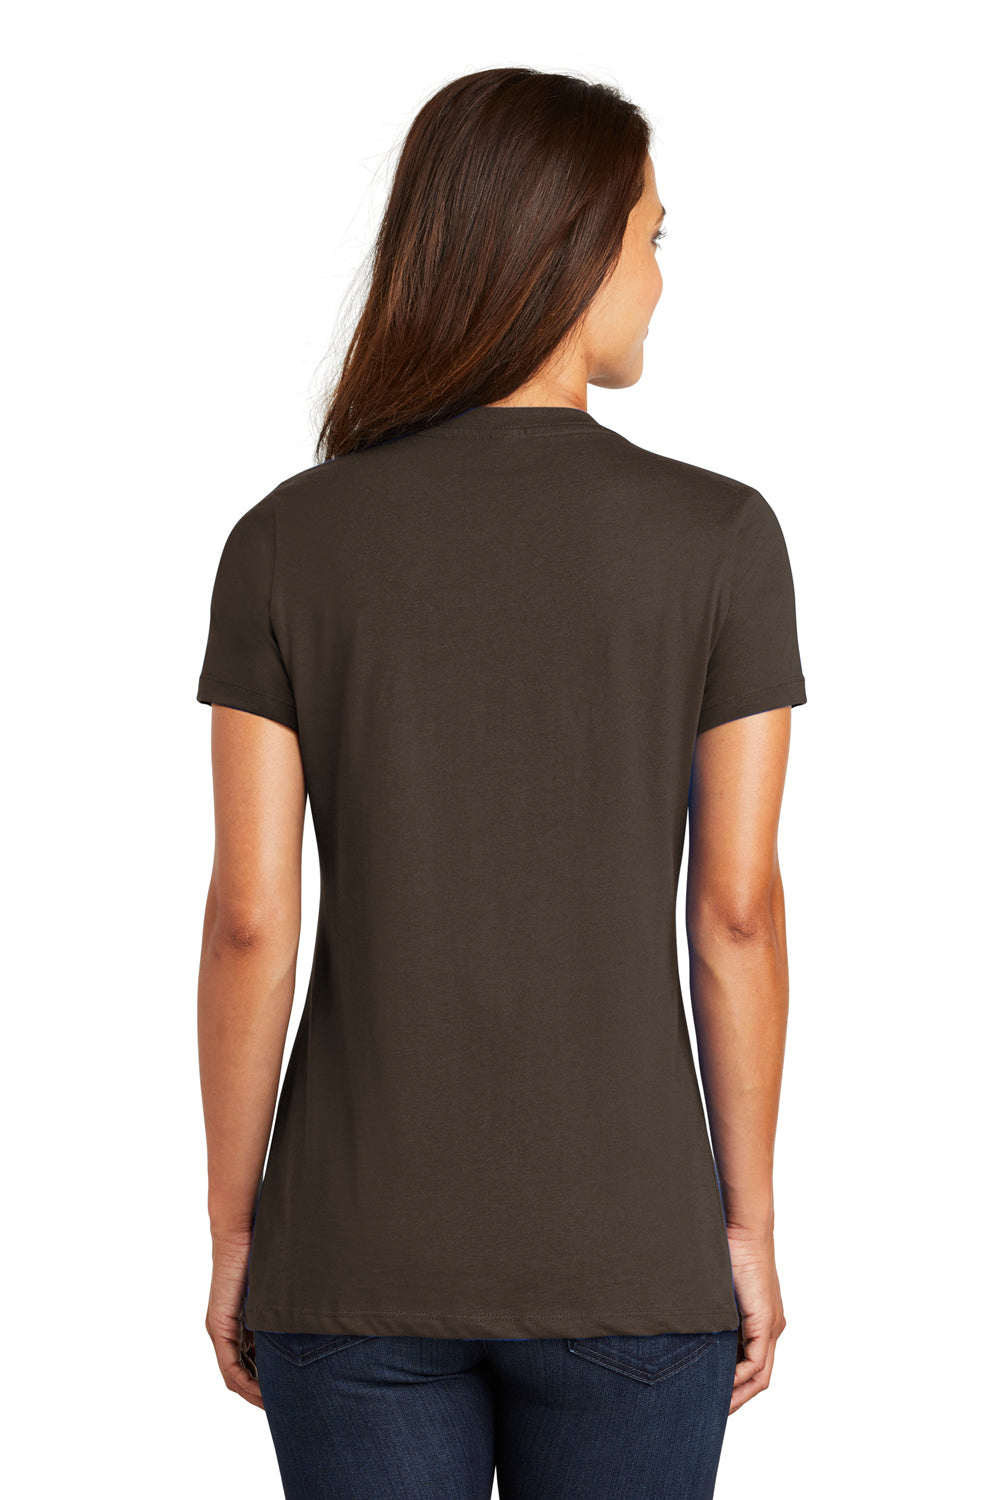 District DM1170L Womens Perfect Weight Short Sleeve V-Neck T-Shirt Espresso Brown Back